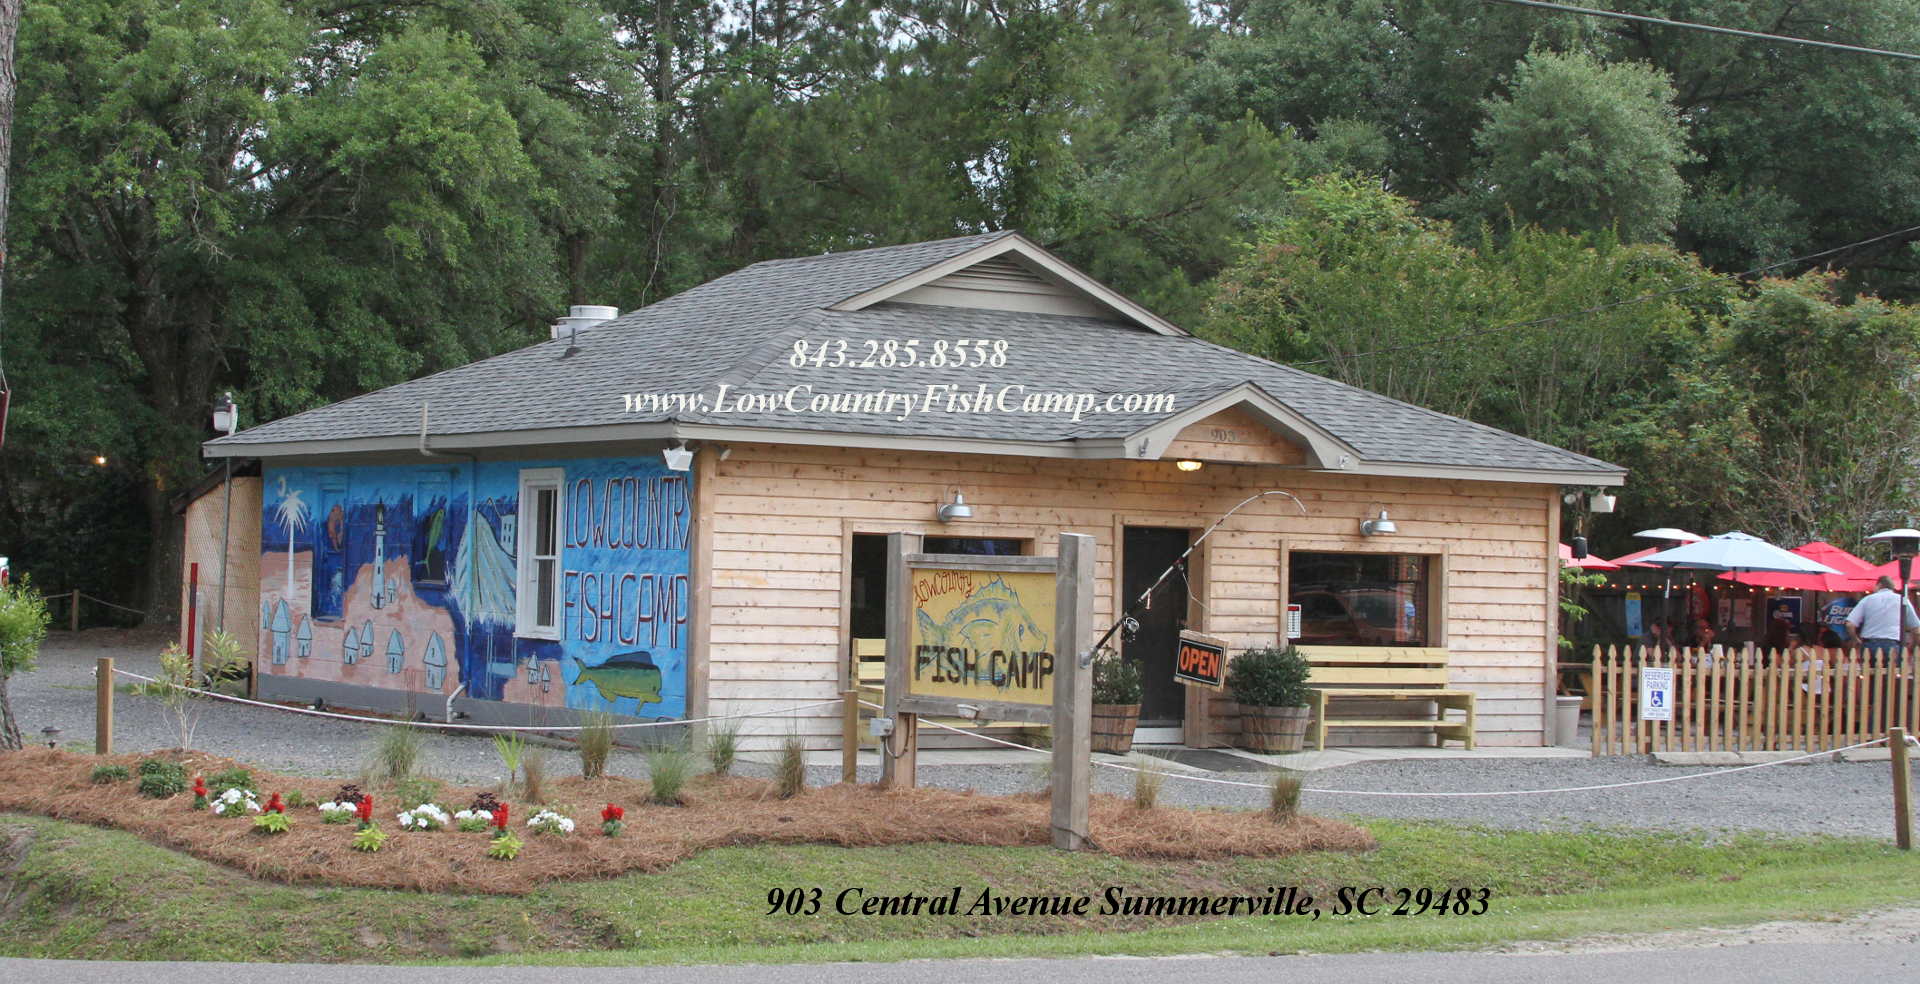 Low Country Fish Camp - Summerville, SC 29483